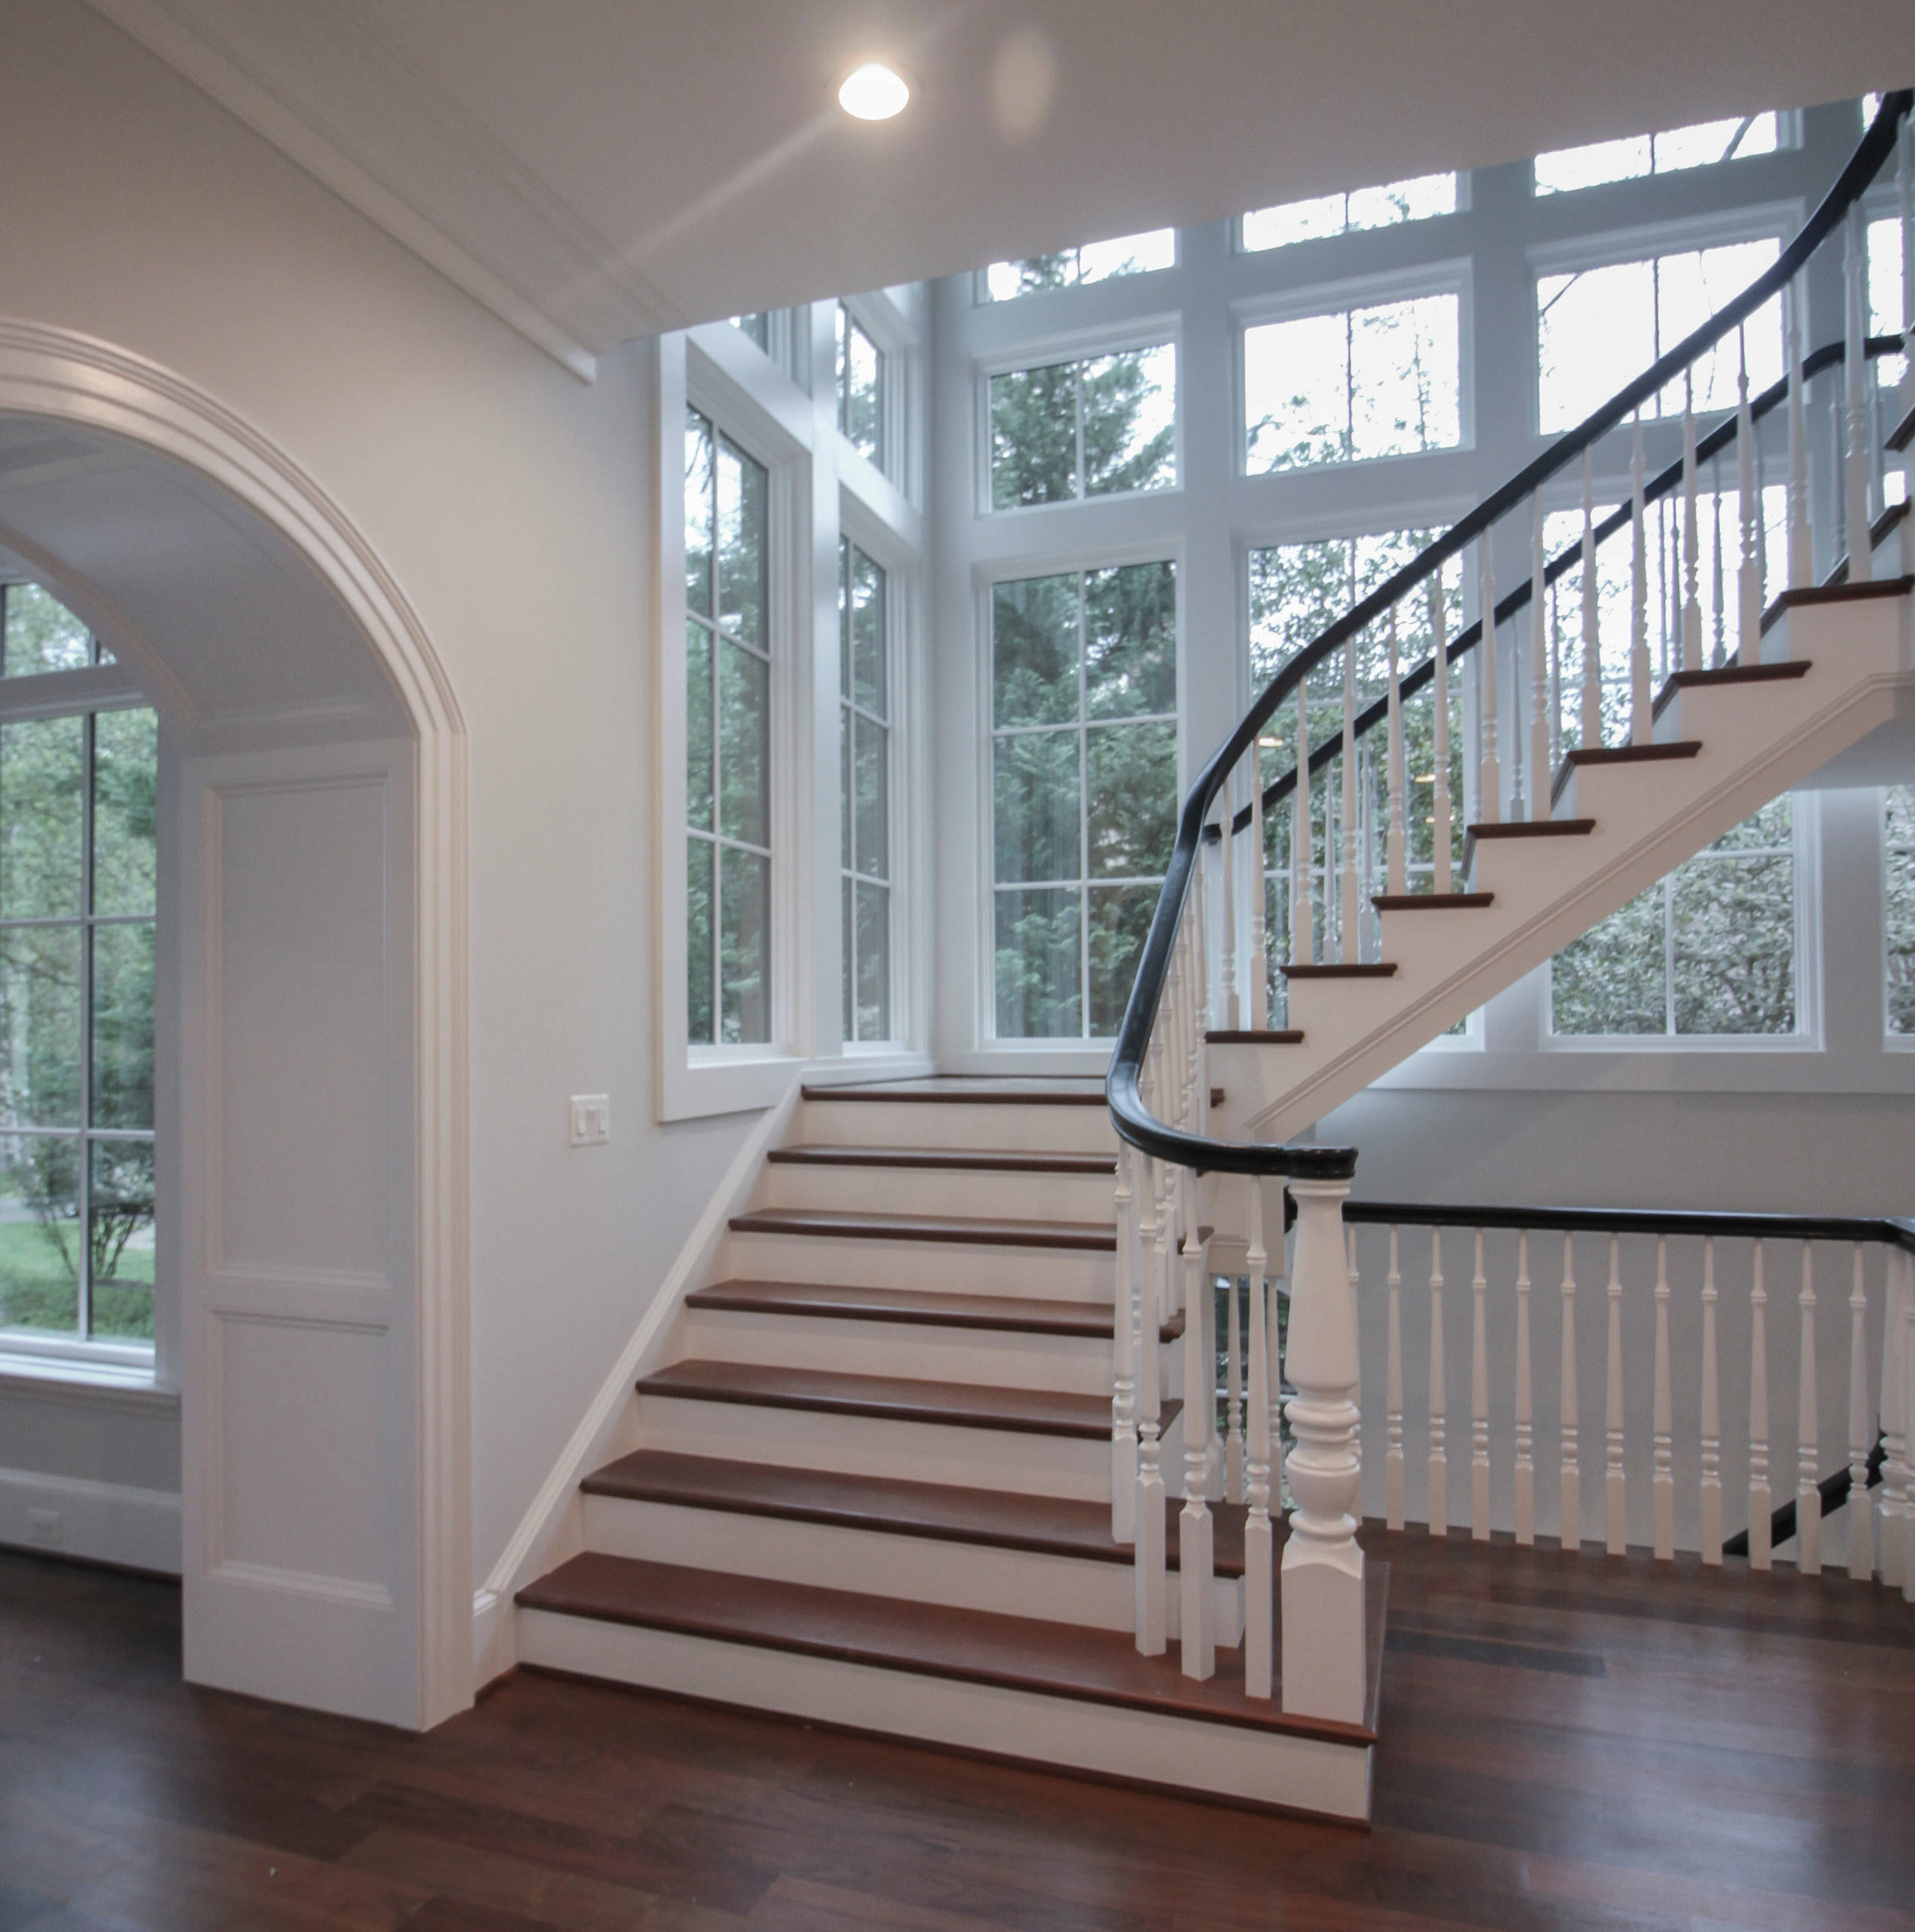 43_Powerful Impression by Floating Staircase, Mclean VA 22101